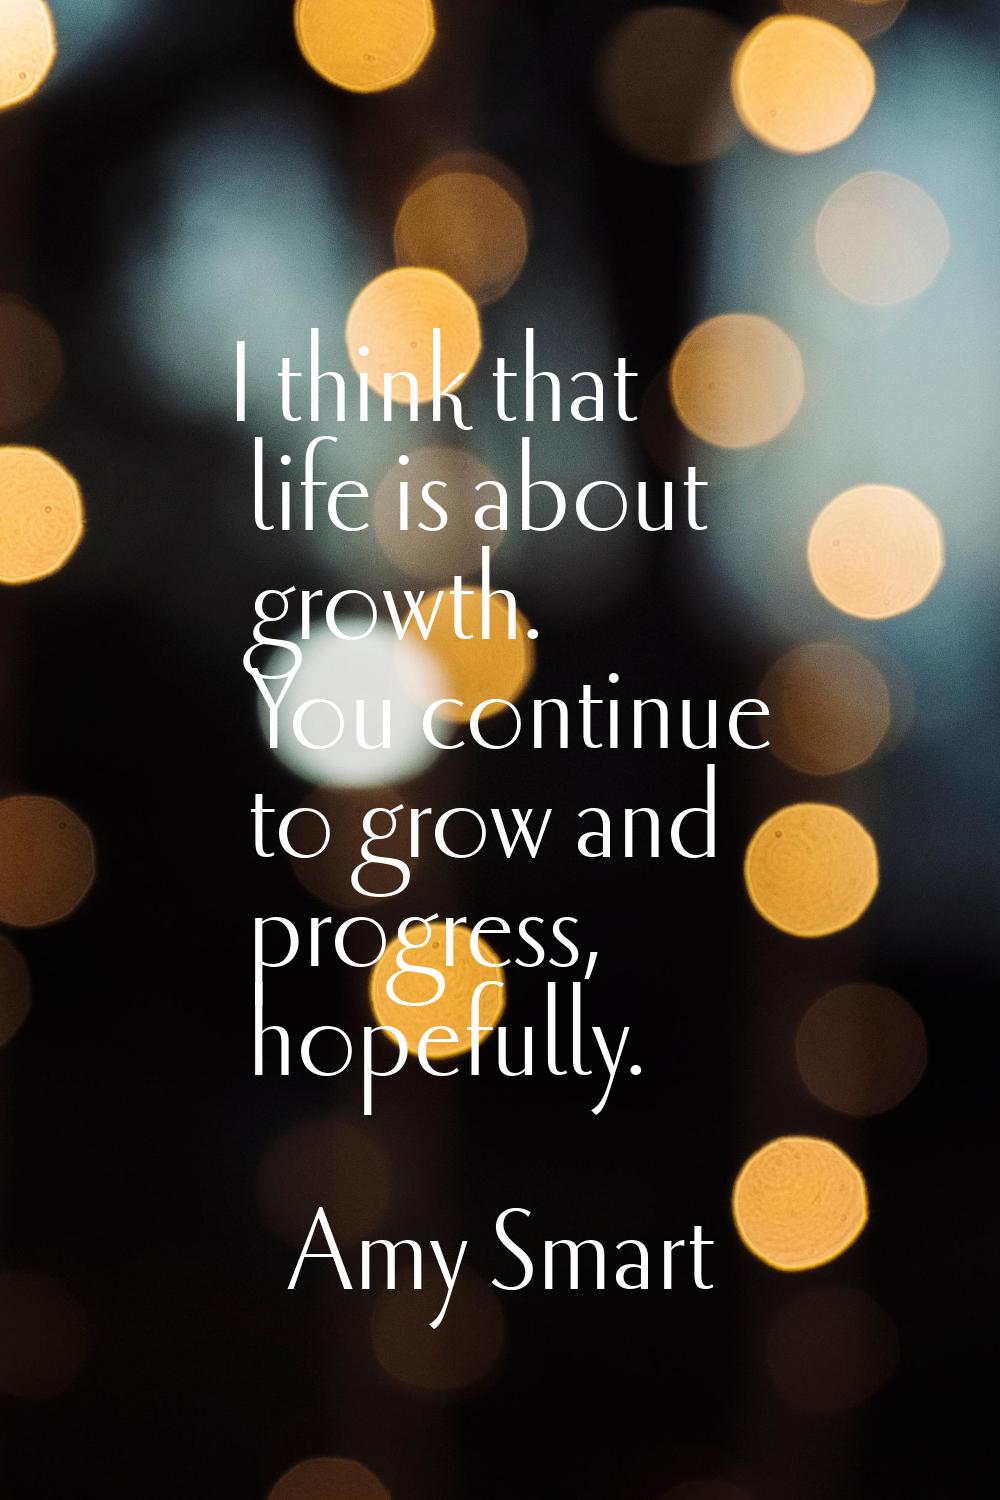 I think that life is about growth. You continue to grow and progress, hopefully.